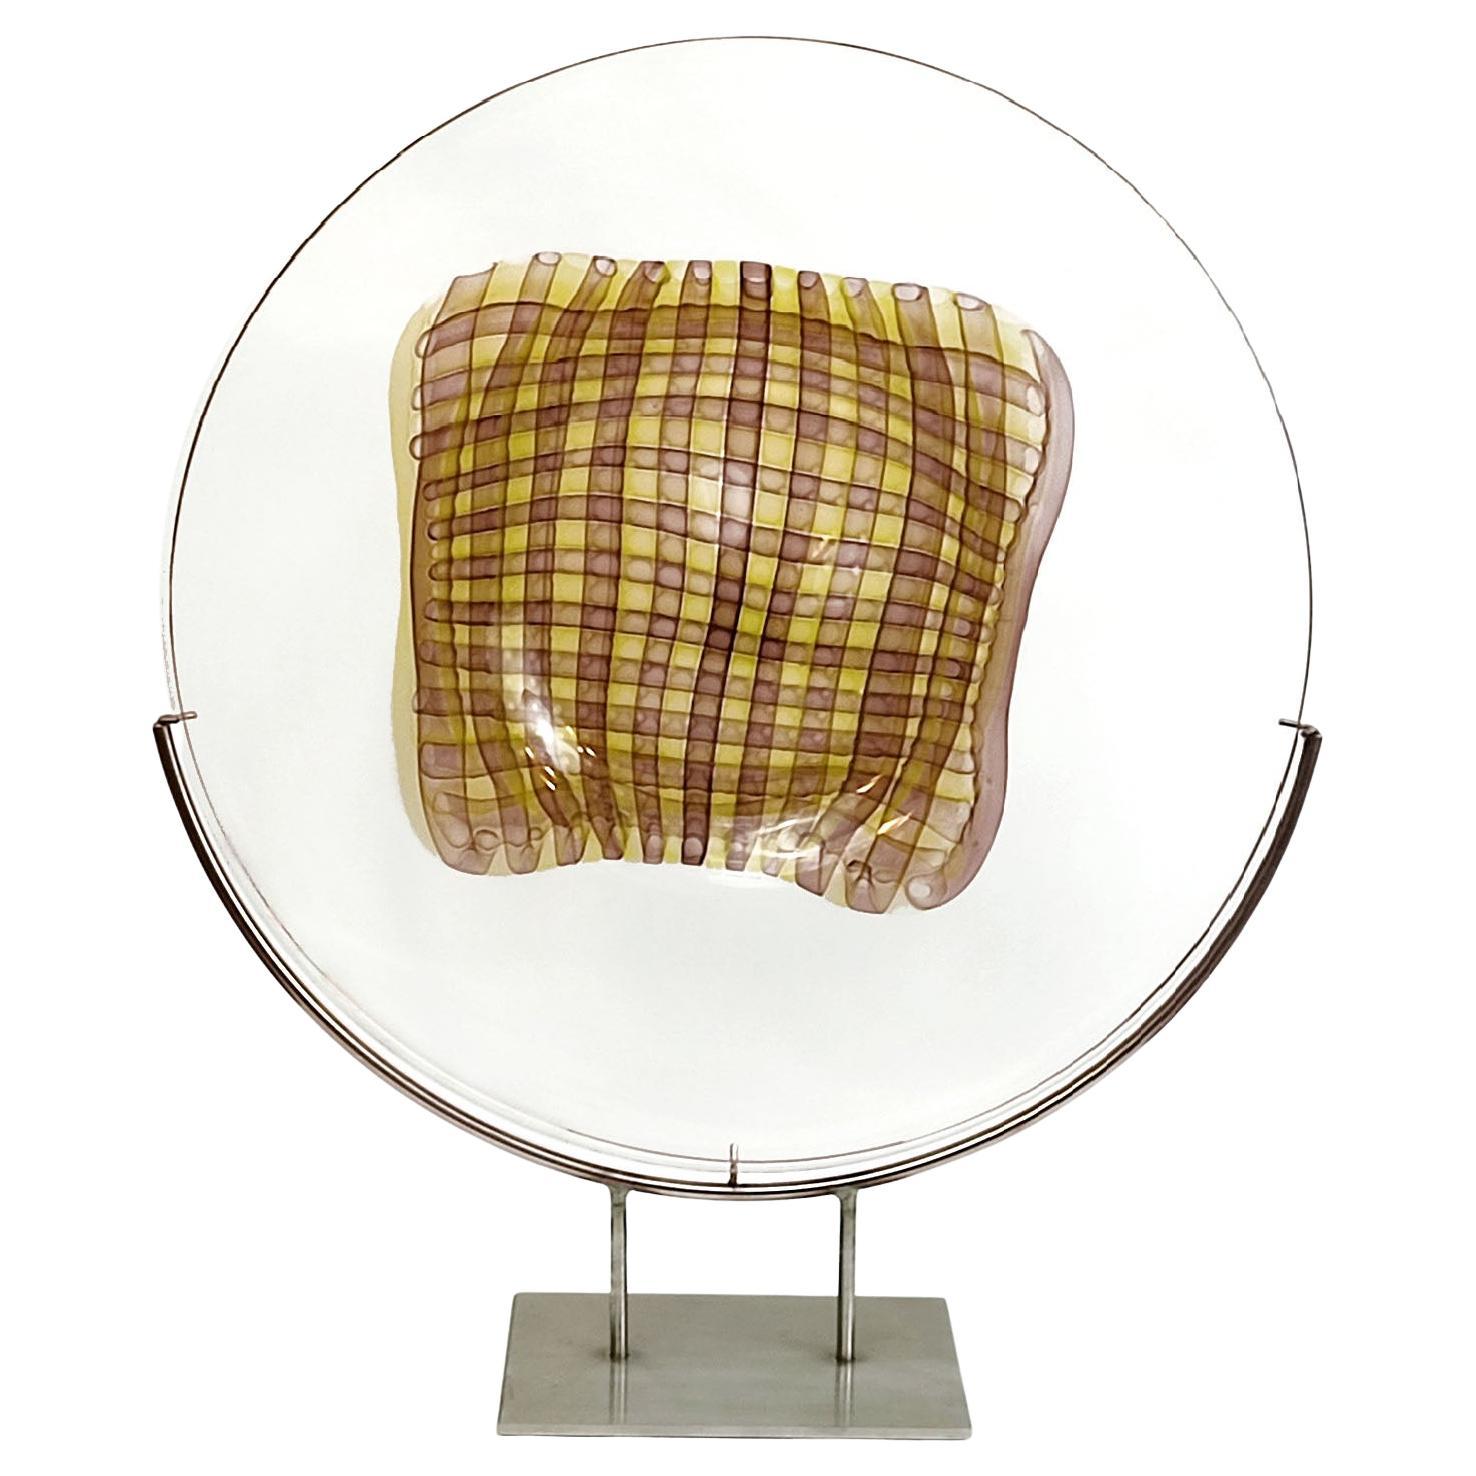 Gary Beecham Large Decorative Glass Plate 'Textile Vessel', 1982 For Sale